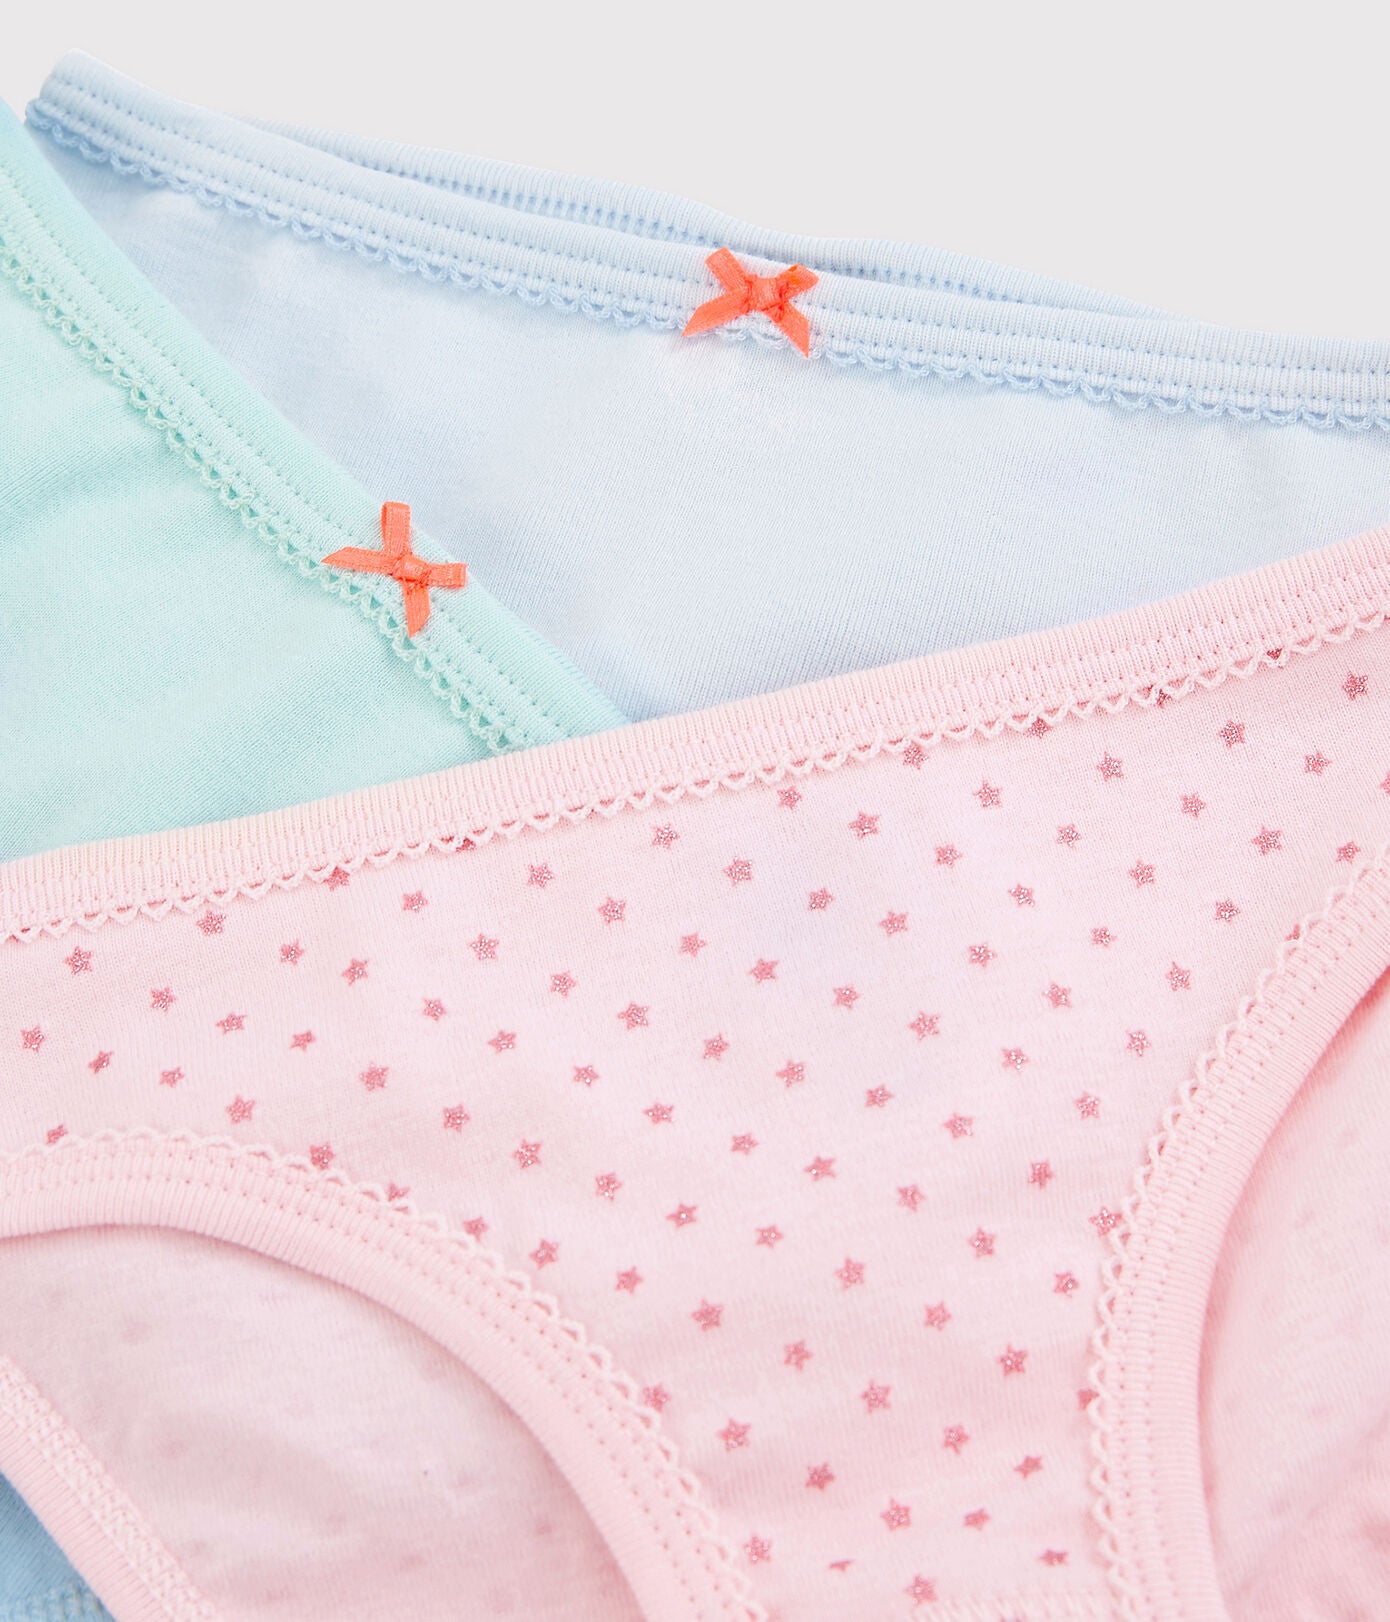 Girls' Starry Knickers - 3-Pack - Cémarose Canada